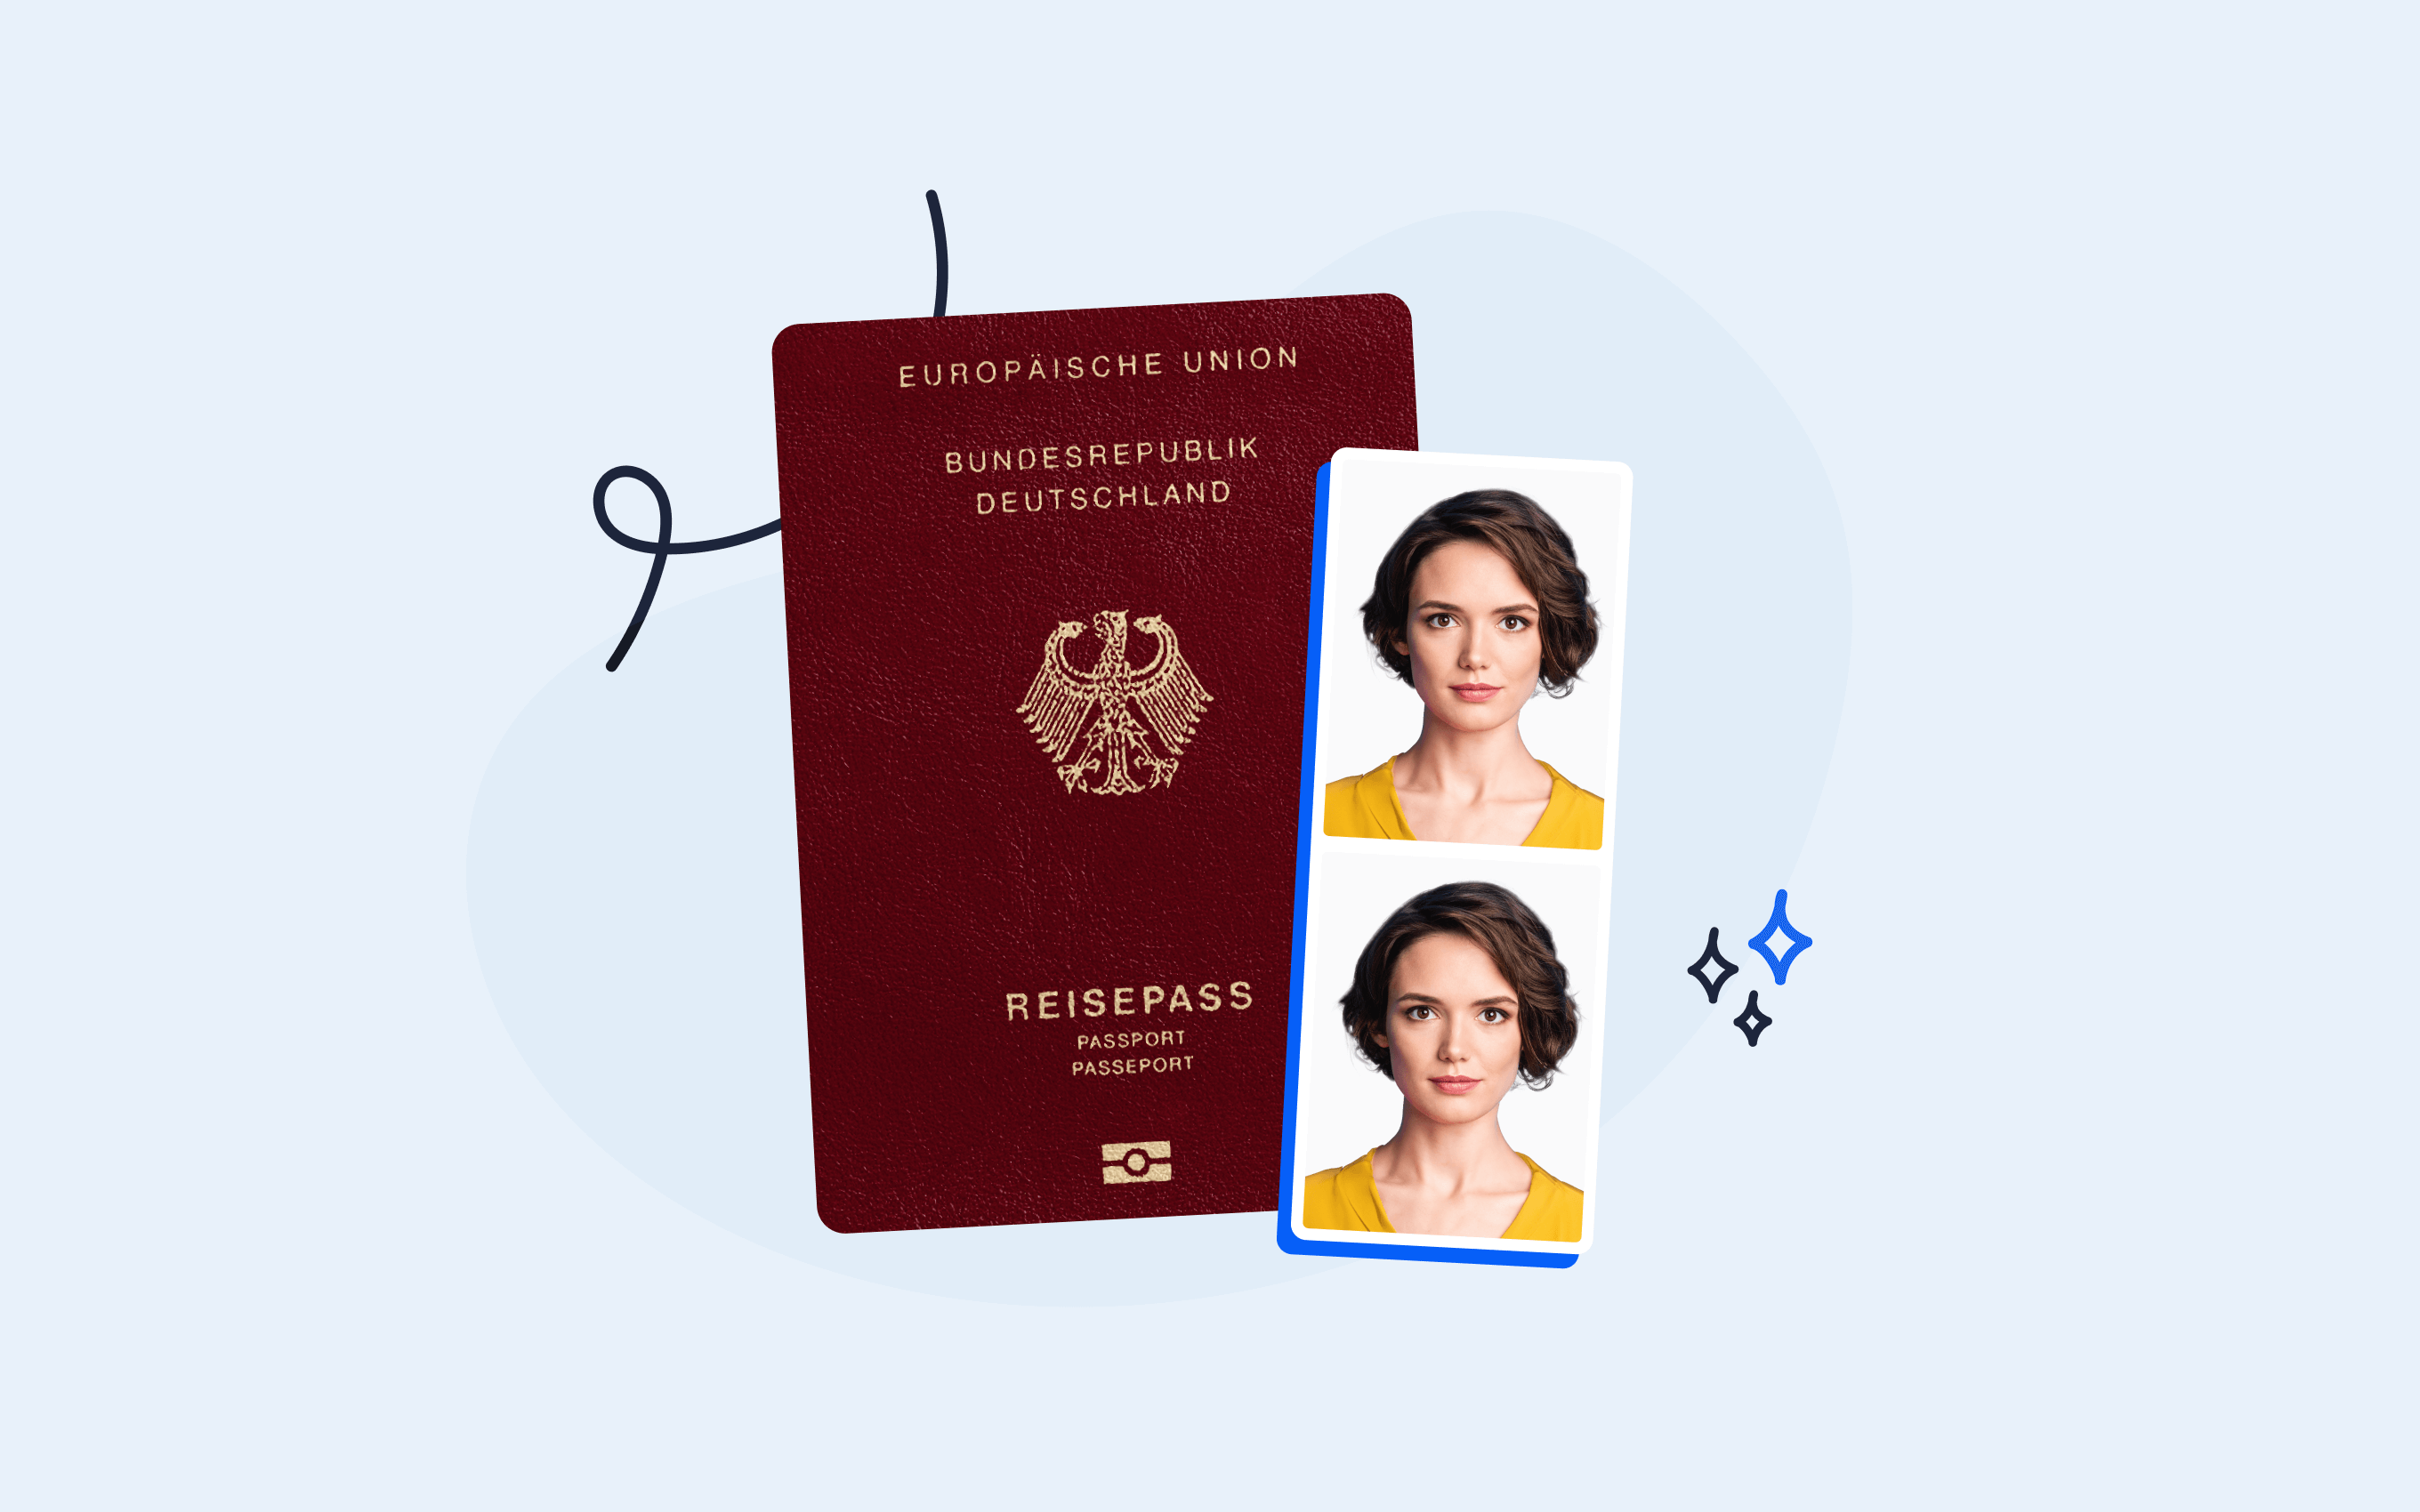 An image showing the German passport and 2 passport photos side-by-side.